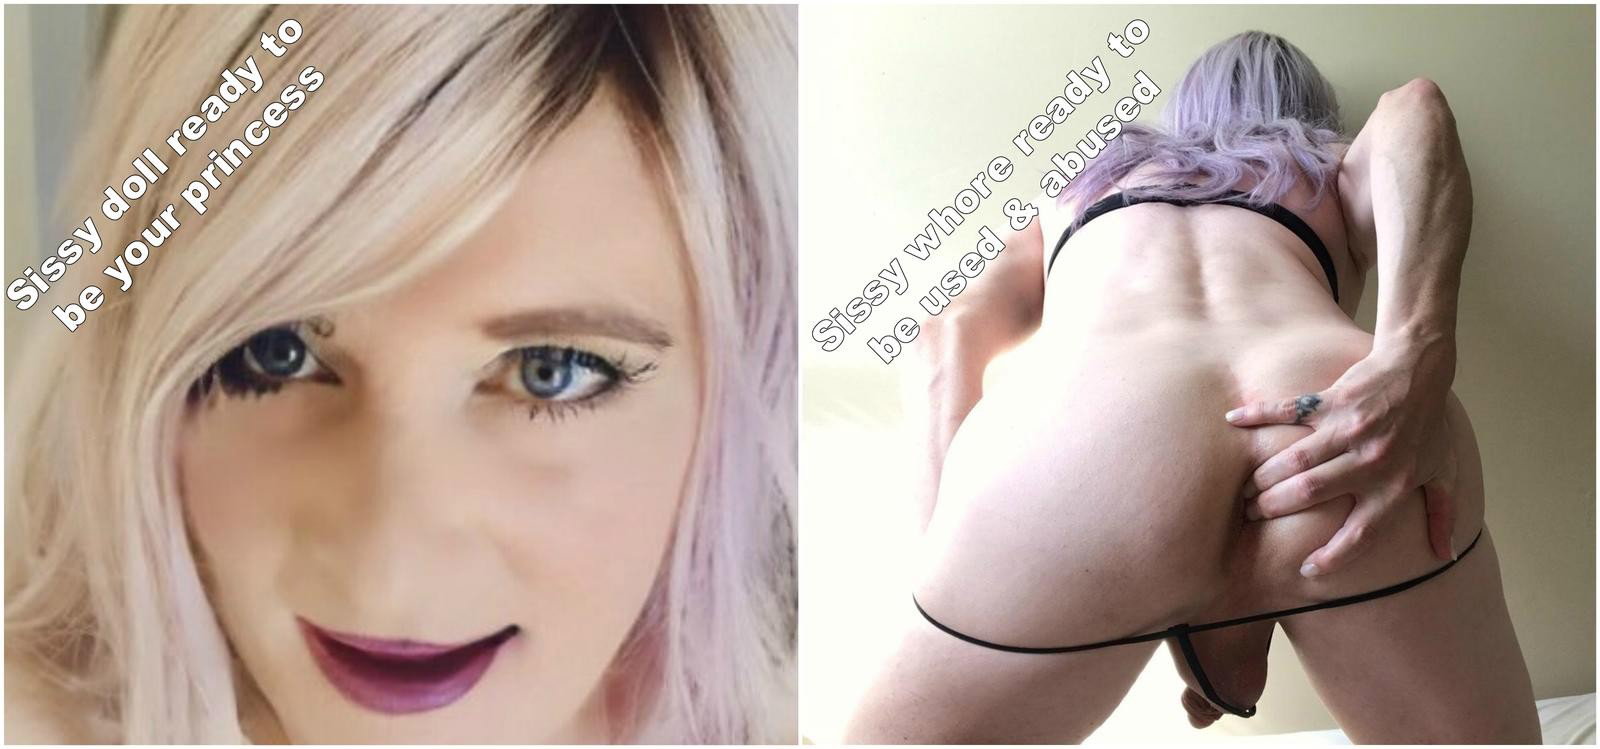 Photo by Shonni B with the username @ShonniB, who is a verified user,  May 11, 2020 at 11:28 PM. The post is about the topic My SIssy Selfies and the text says 'treat me like a princess, fuck me like a whore #sissy'